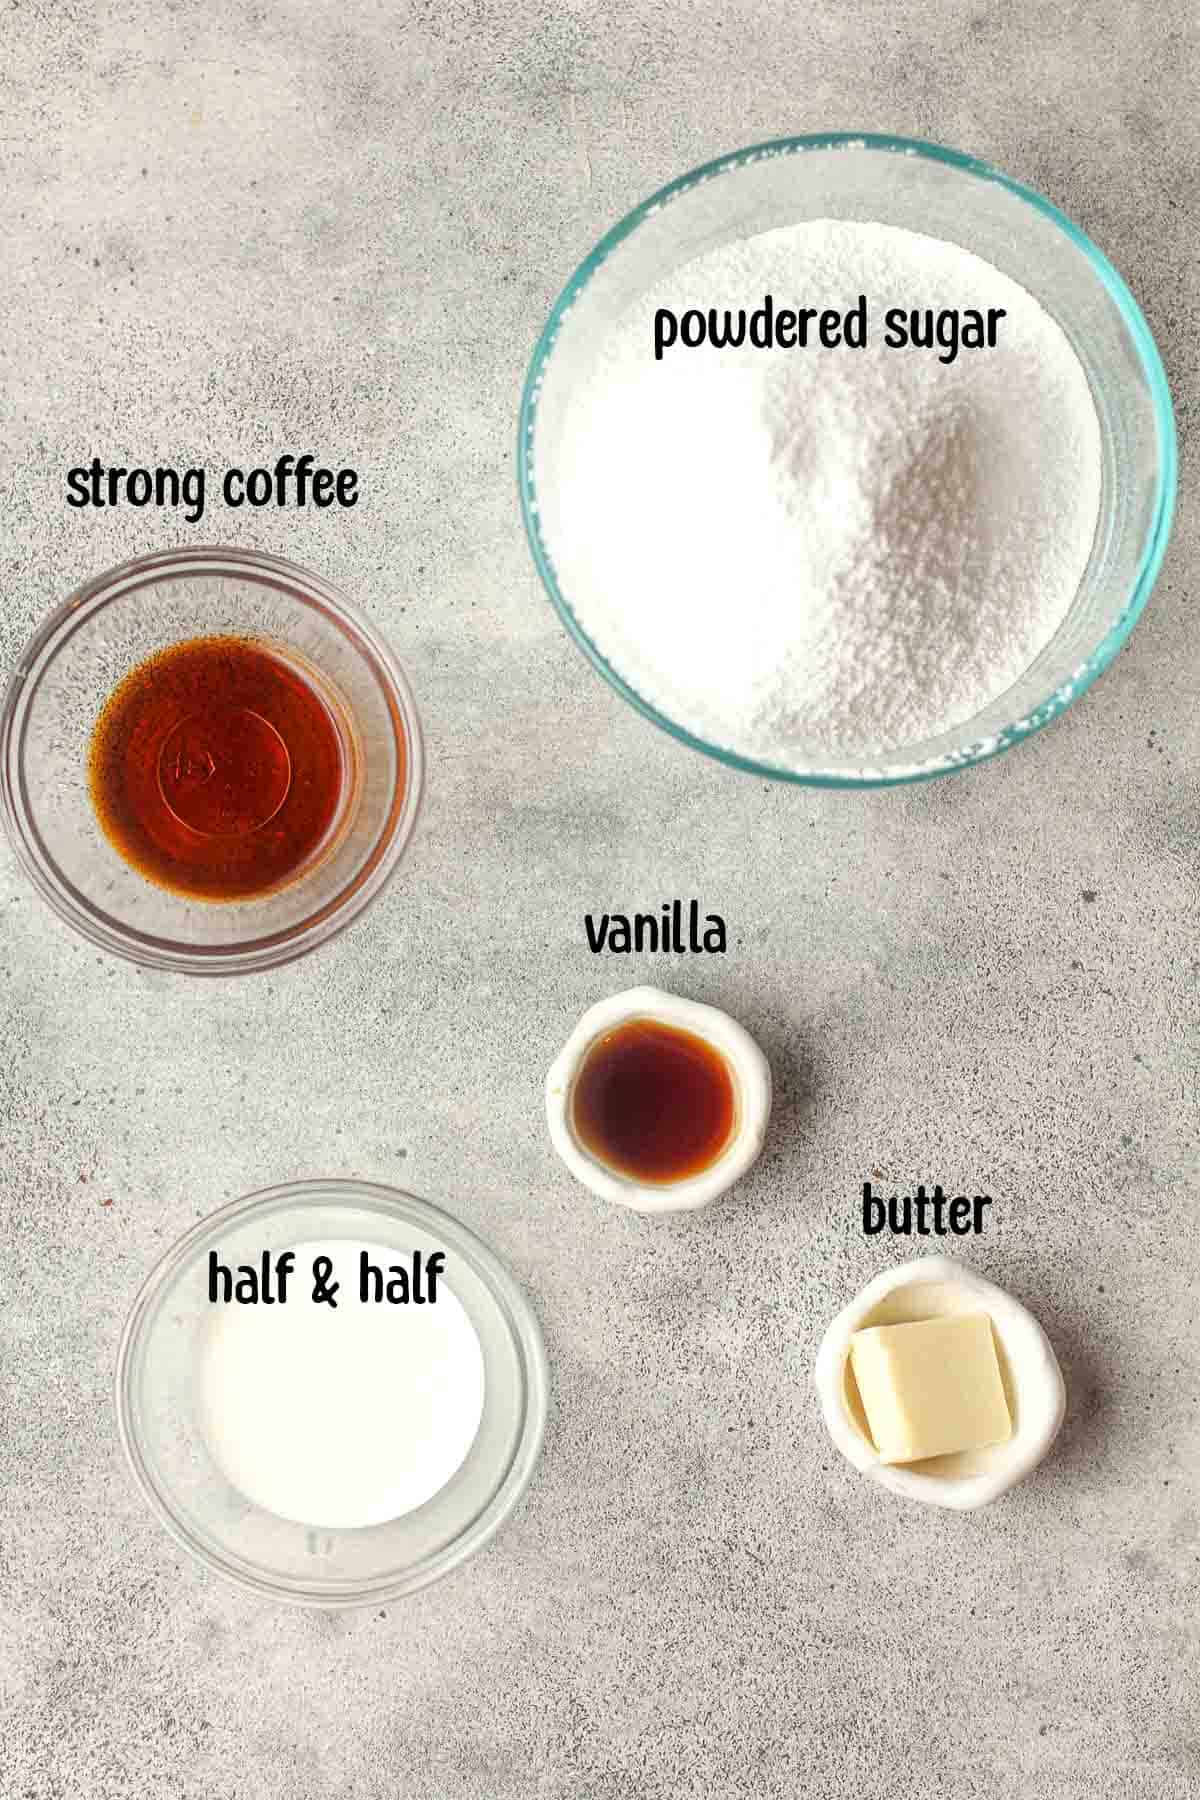 Ingredients for the icing.